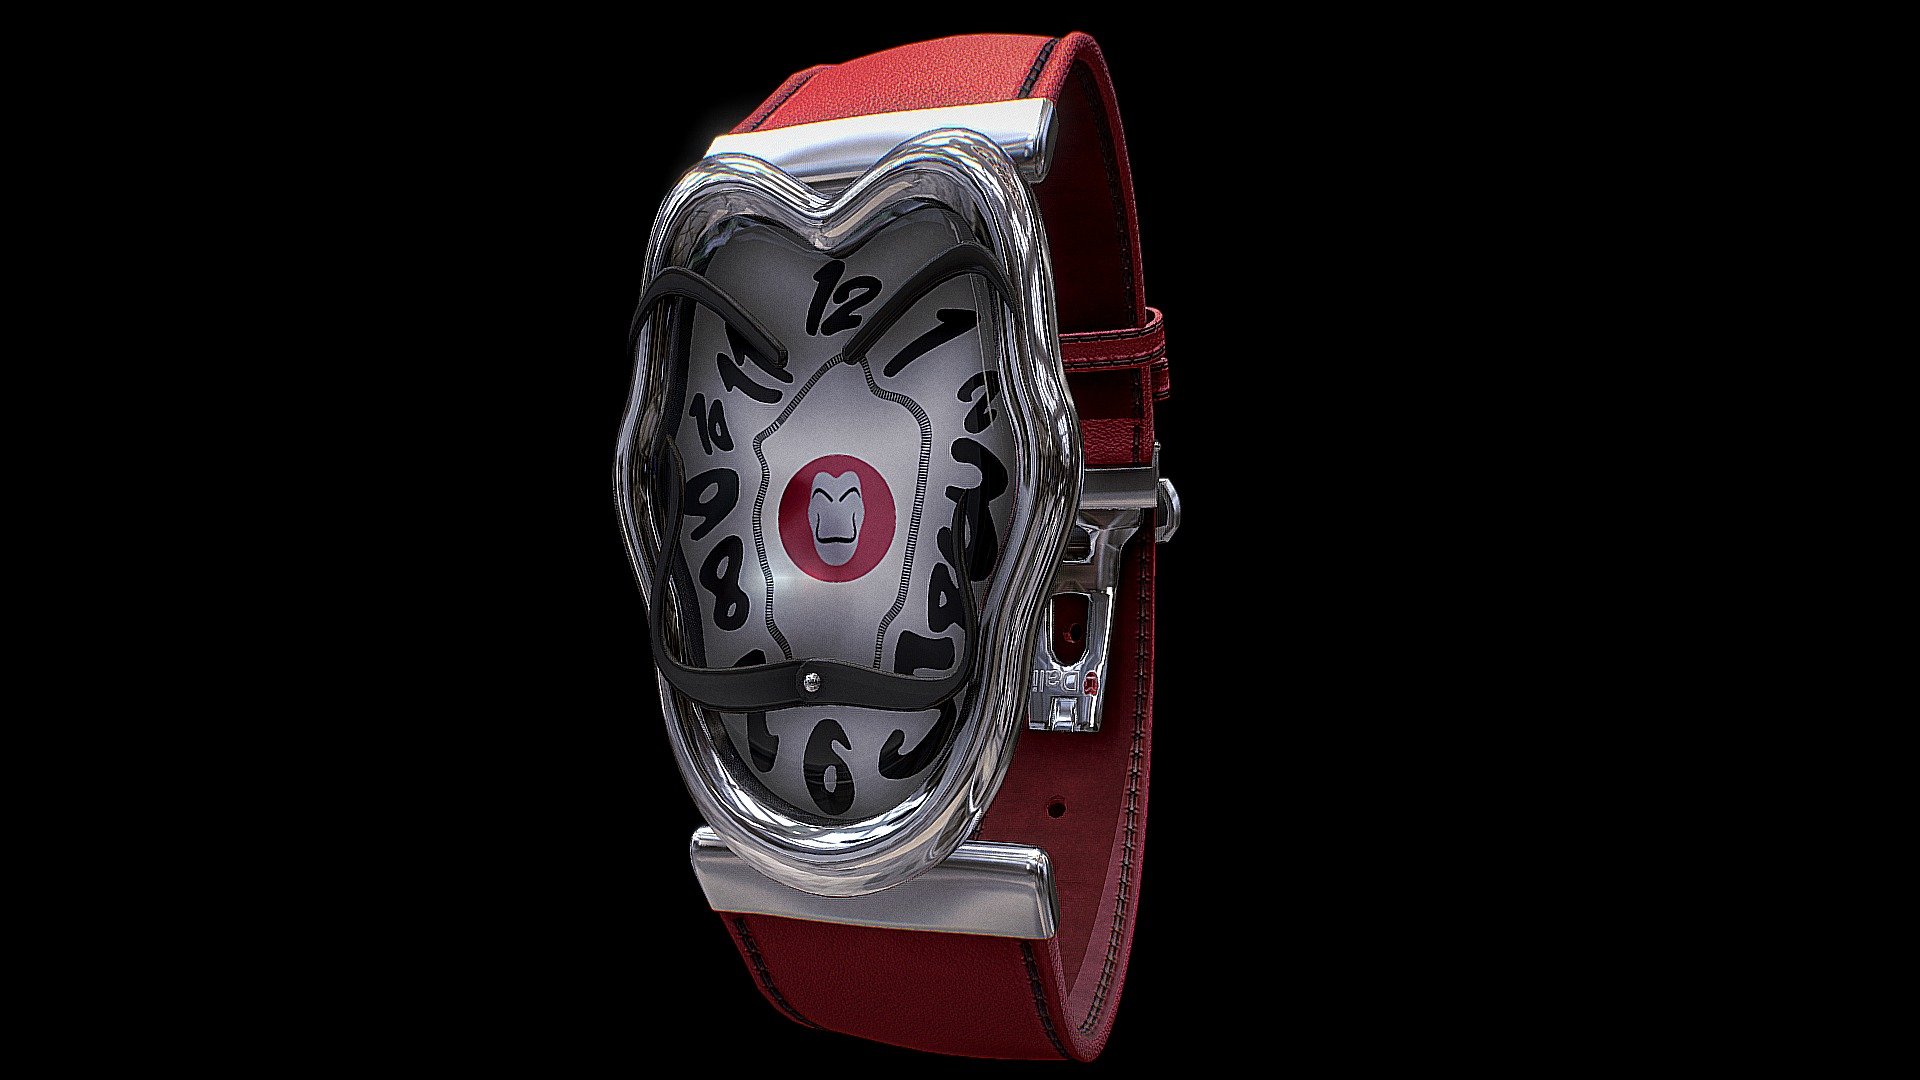 Awesome stainless steel Dali Coin Watch.

Currently available for download in FBX format.

3D model developed by AR-Watches 3d model